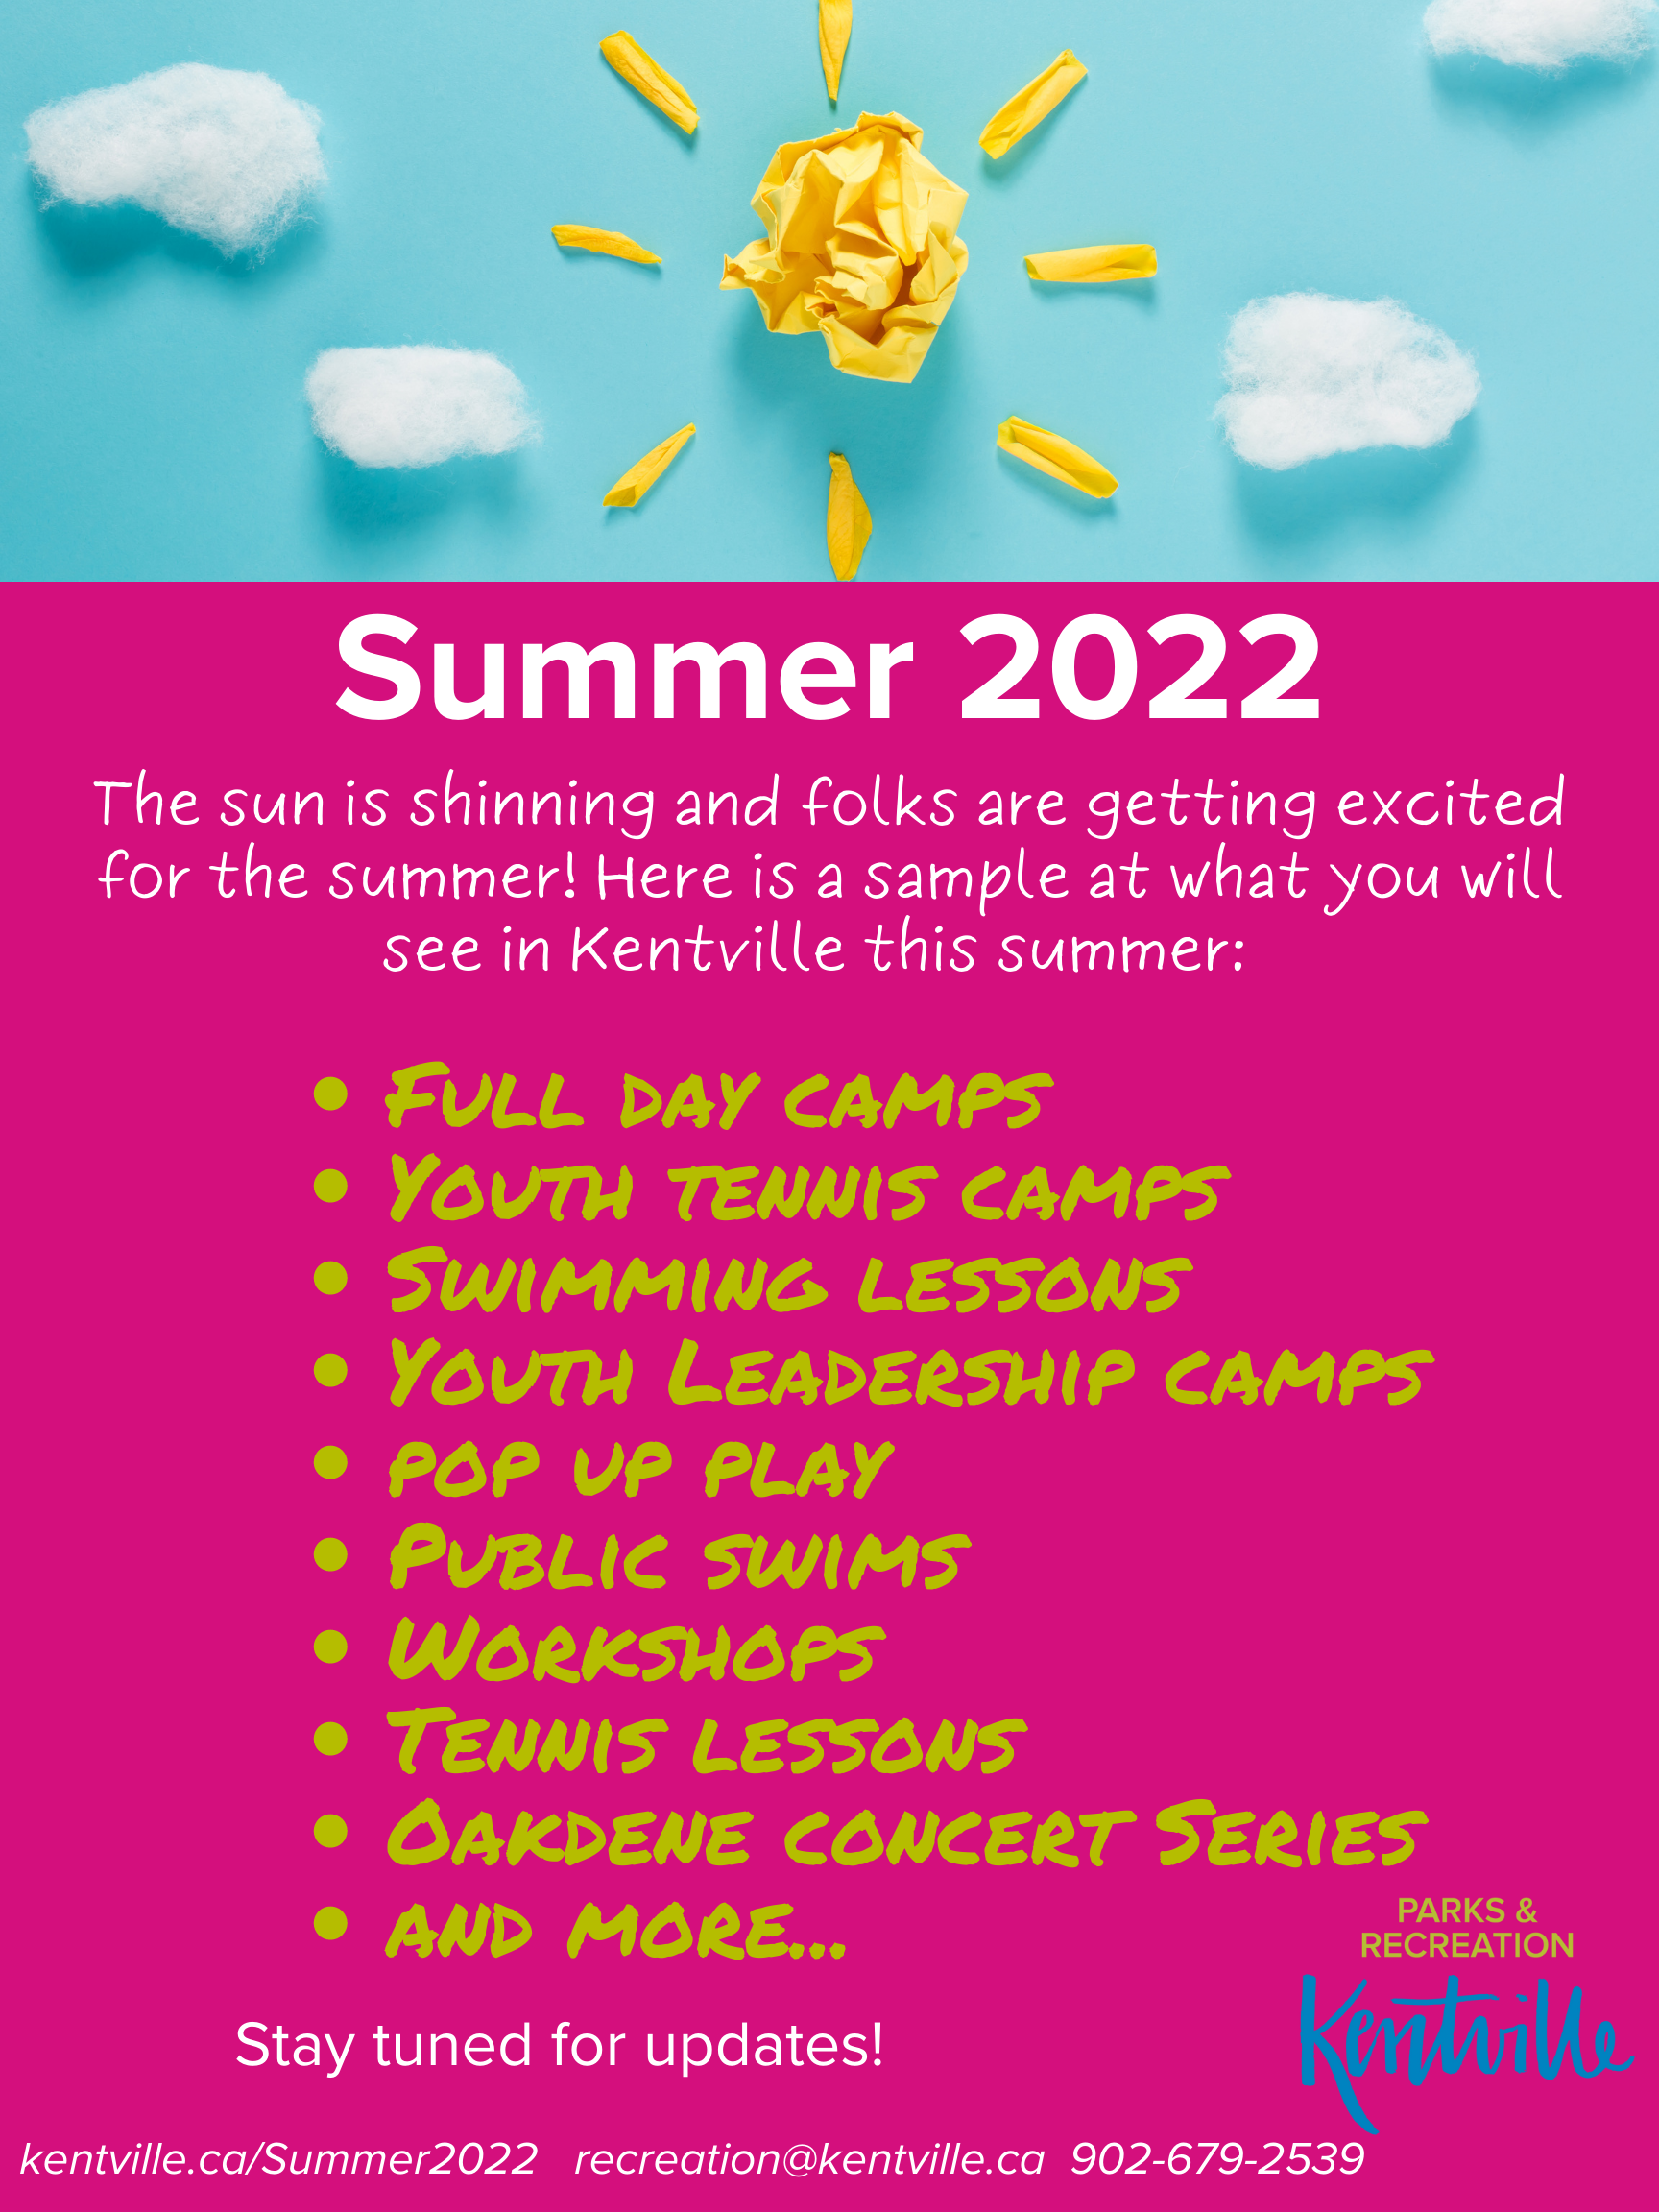 Image listing program and event opportunities in Kentville for summer 2022 such as Day Camp, Tennis Lessons, Swimming lessons, Oakdene Summer Concert Series, Youth Leadership Camps, Youth Tennis camps. 